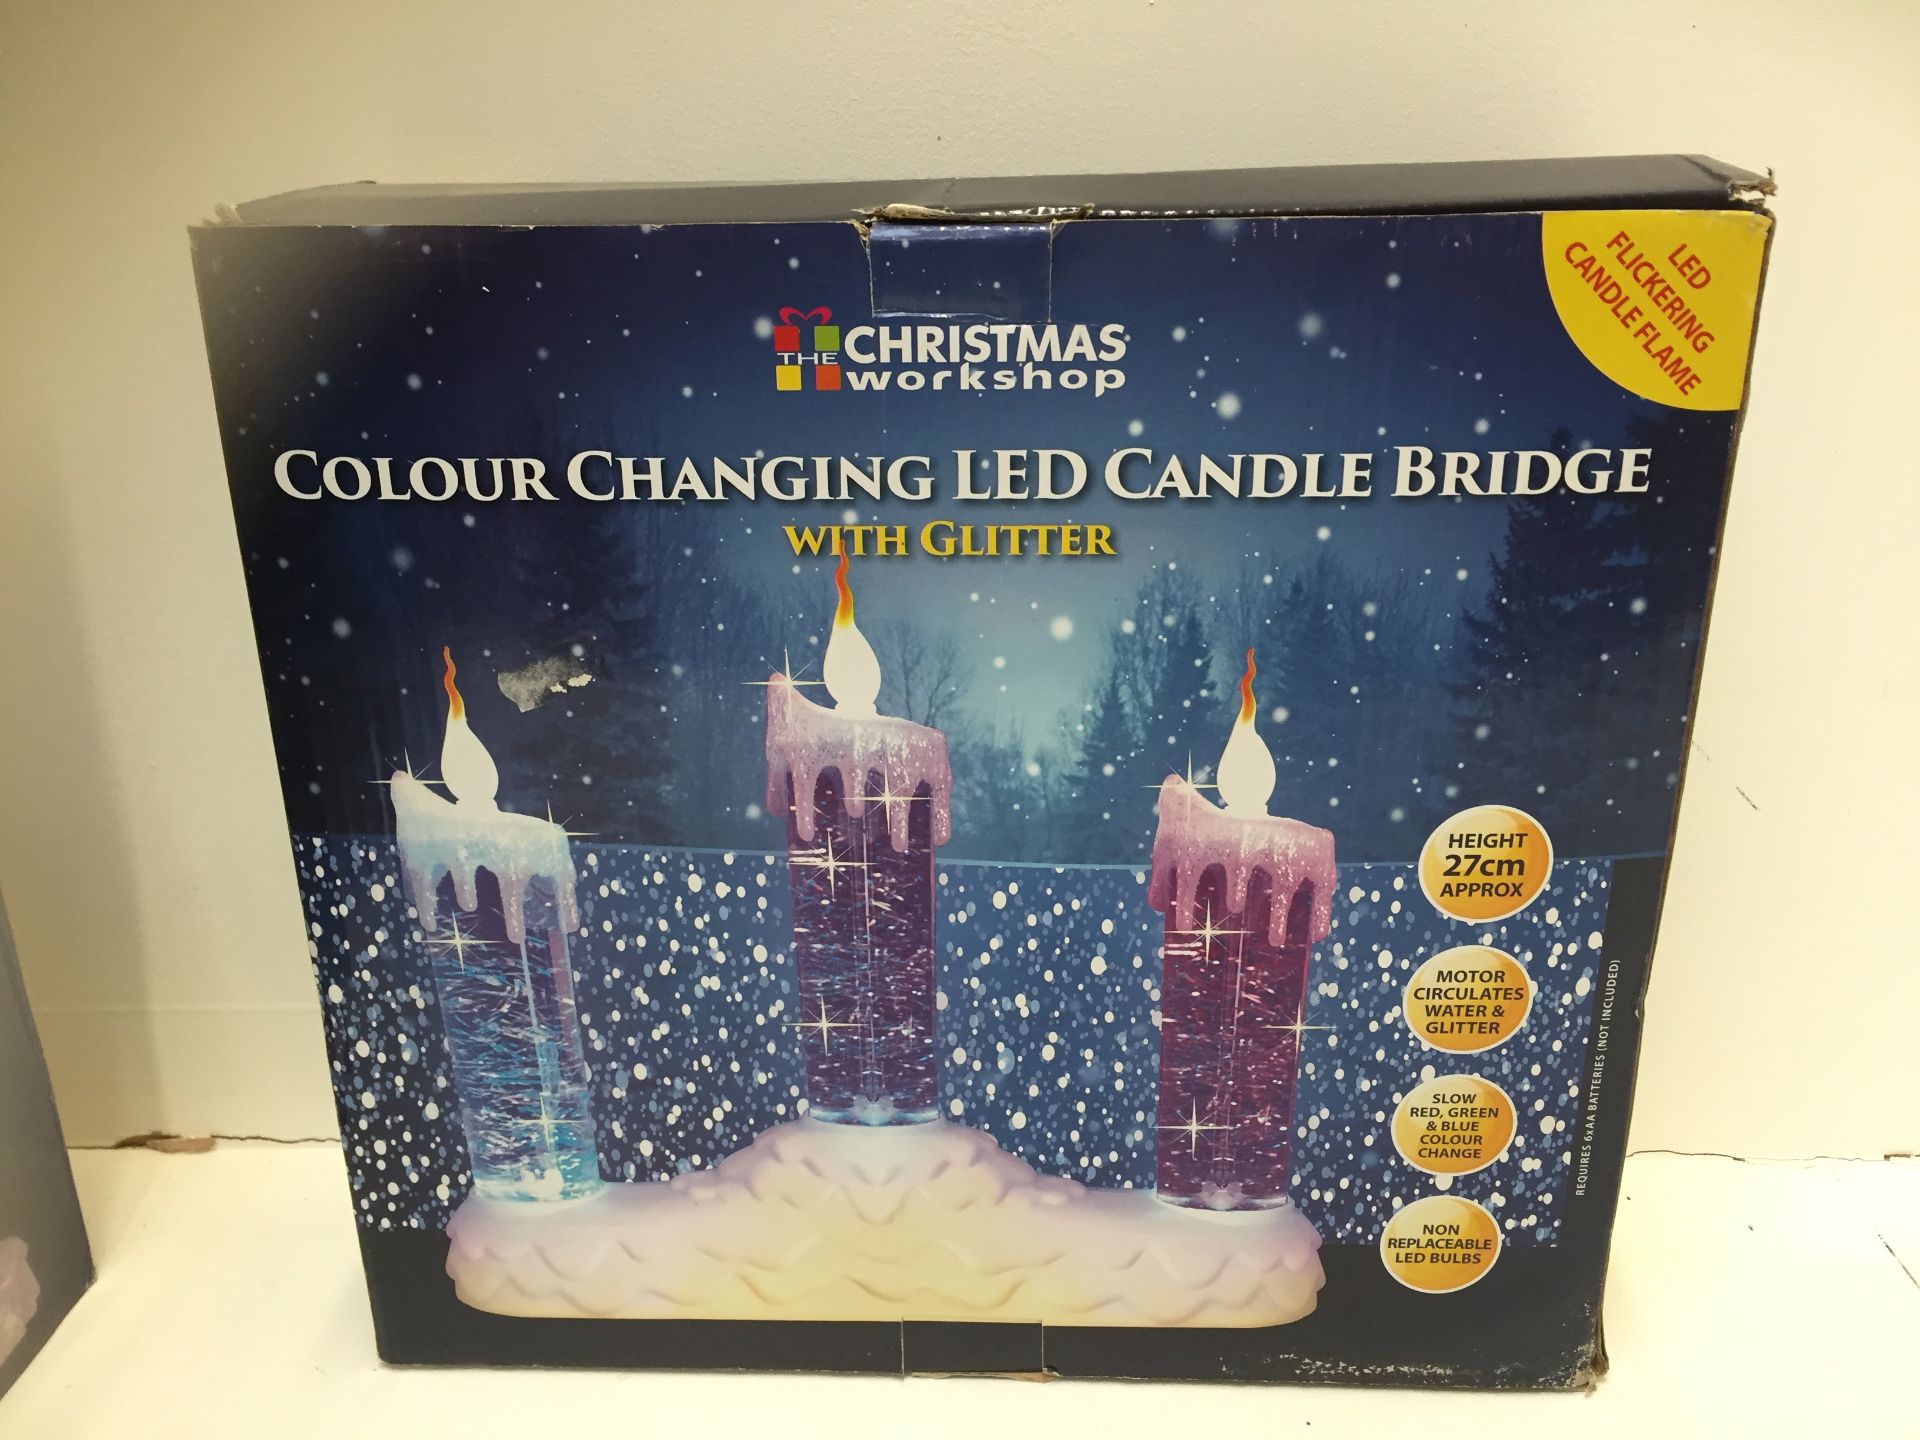 The Benross Christmas Workshop 3 LED Water Candle Bridge Light Ornament_RRP £14.95_B1 All lots in